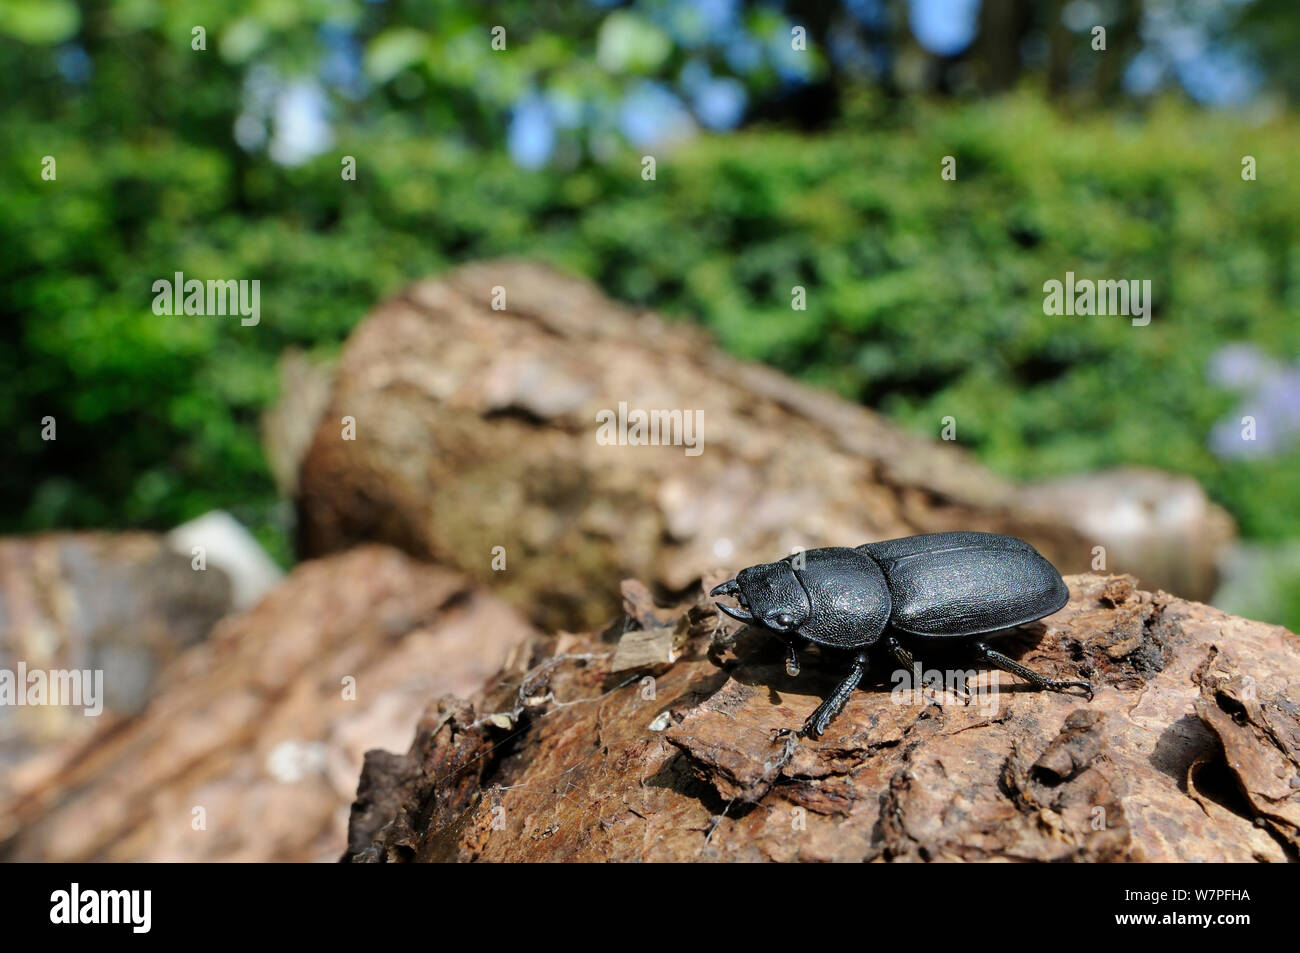 Wide angle view of a male Lesser Stag Beetle (Dorcus parallelipipedus) standing on a log pile, Hertfordshire garden, UK, August. Stock Photo